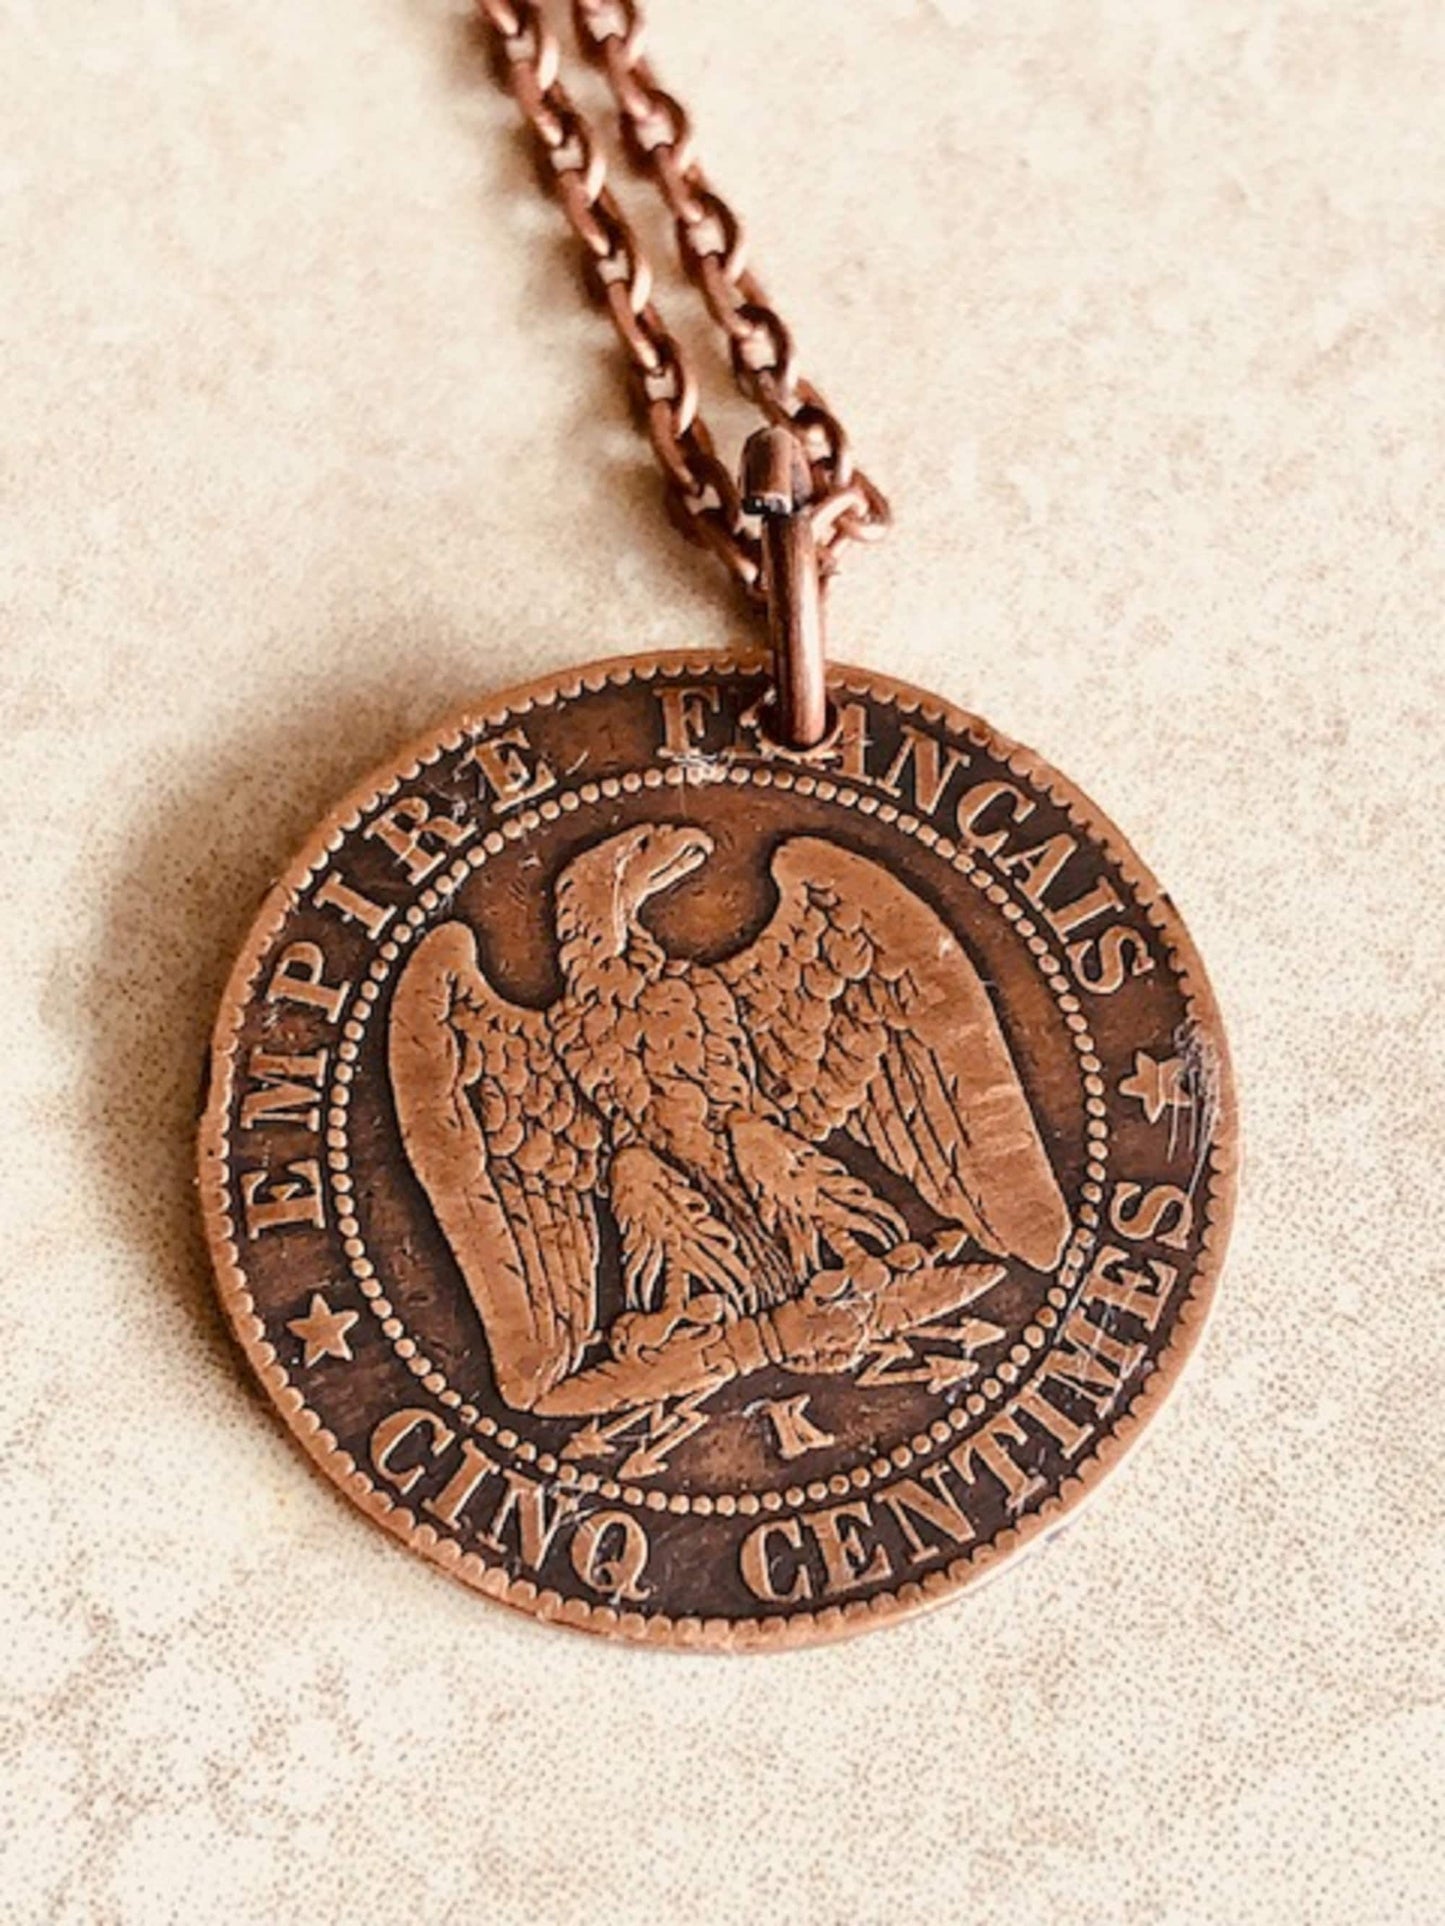 France Coin Necklace French Pendant 1855 10 Dix Centimes Liberty Equality Fraternity Jewelry Gift Friend Charm Him Her World Coin Collector